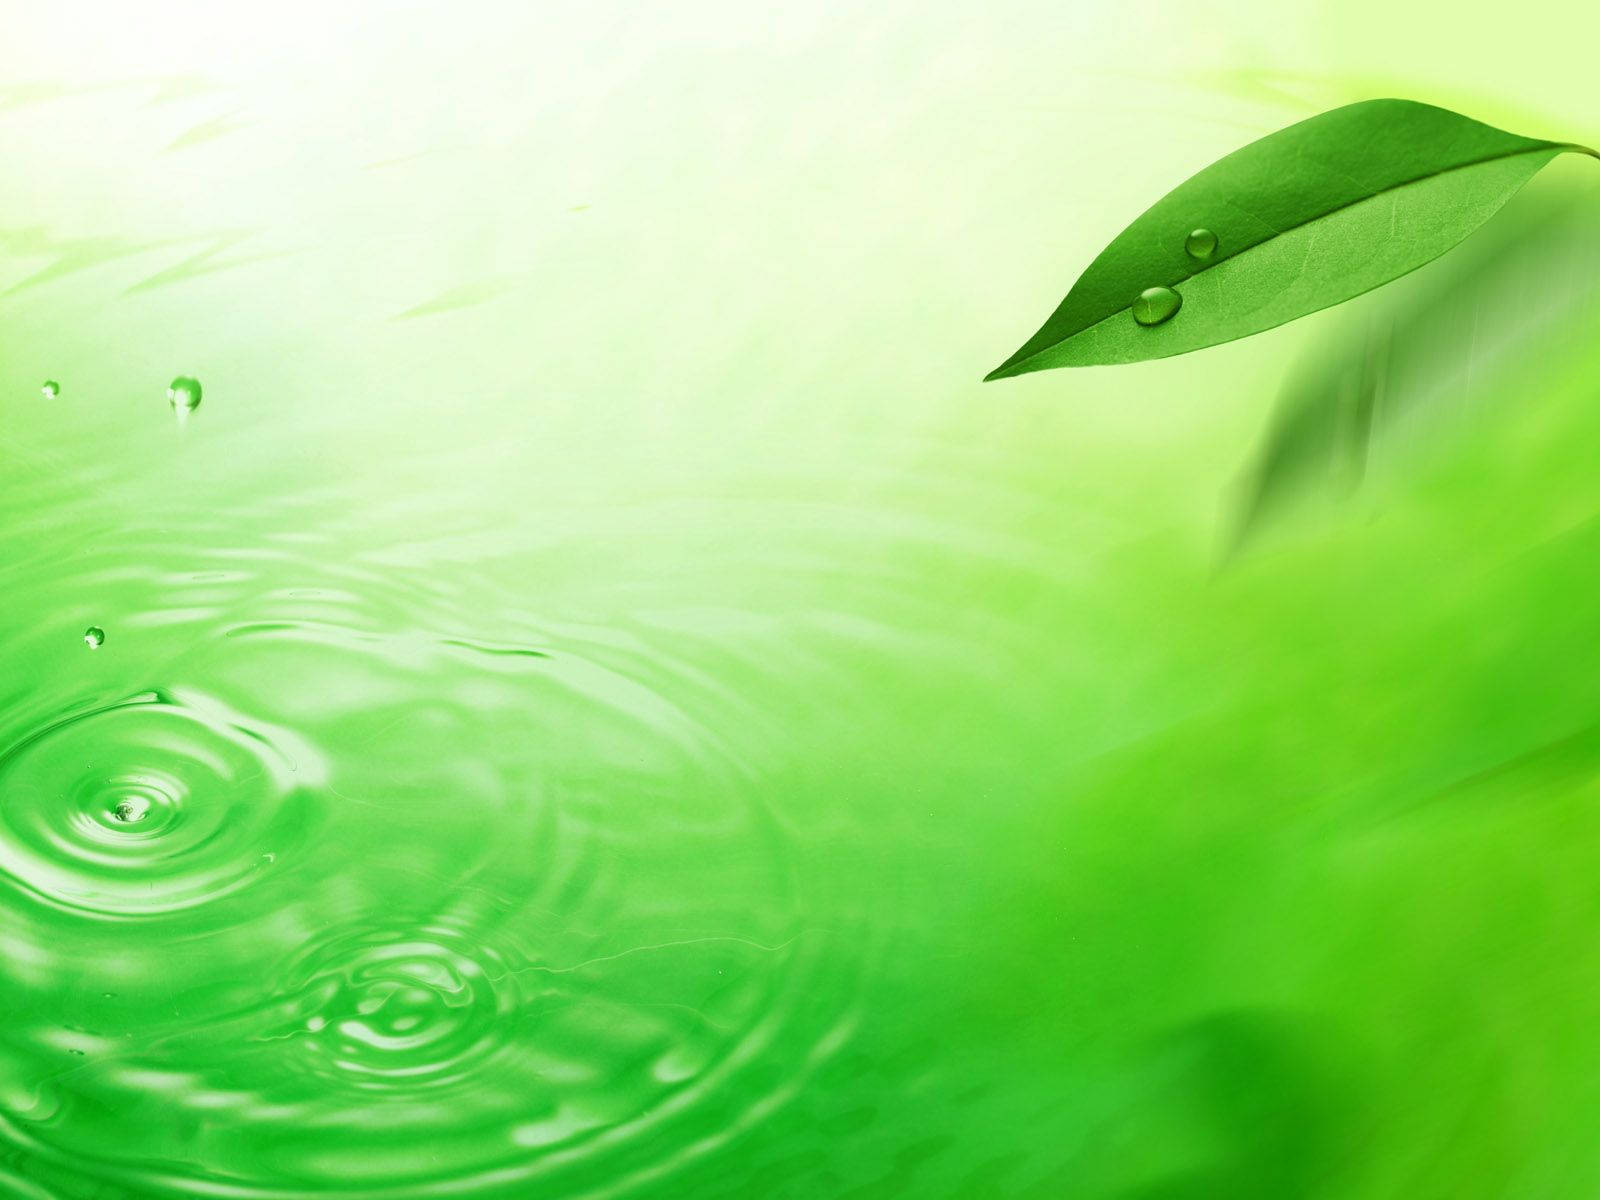 Take In The Beauty Of A Leaf Floating On The Vibrant Green Waters. Background